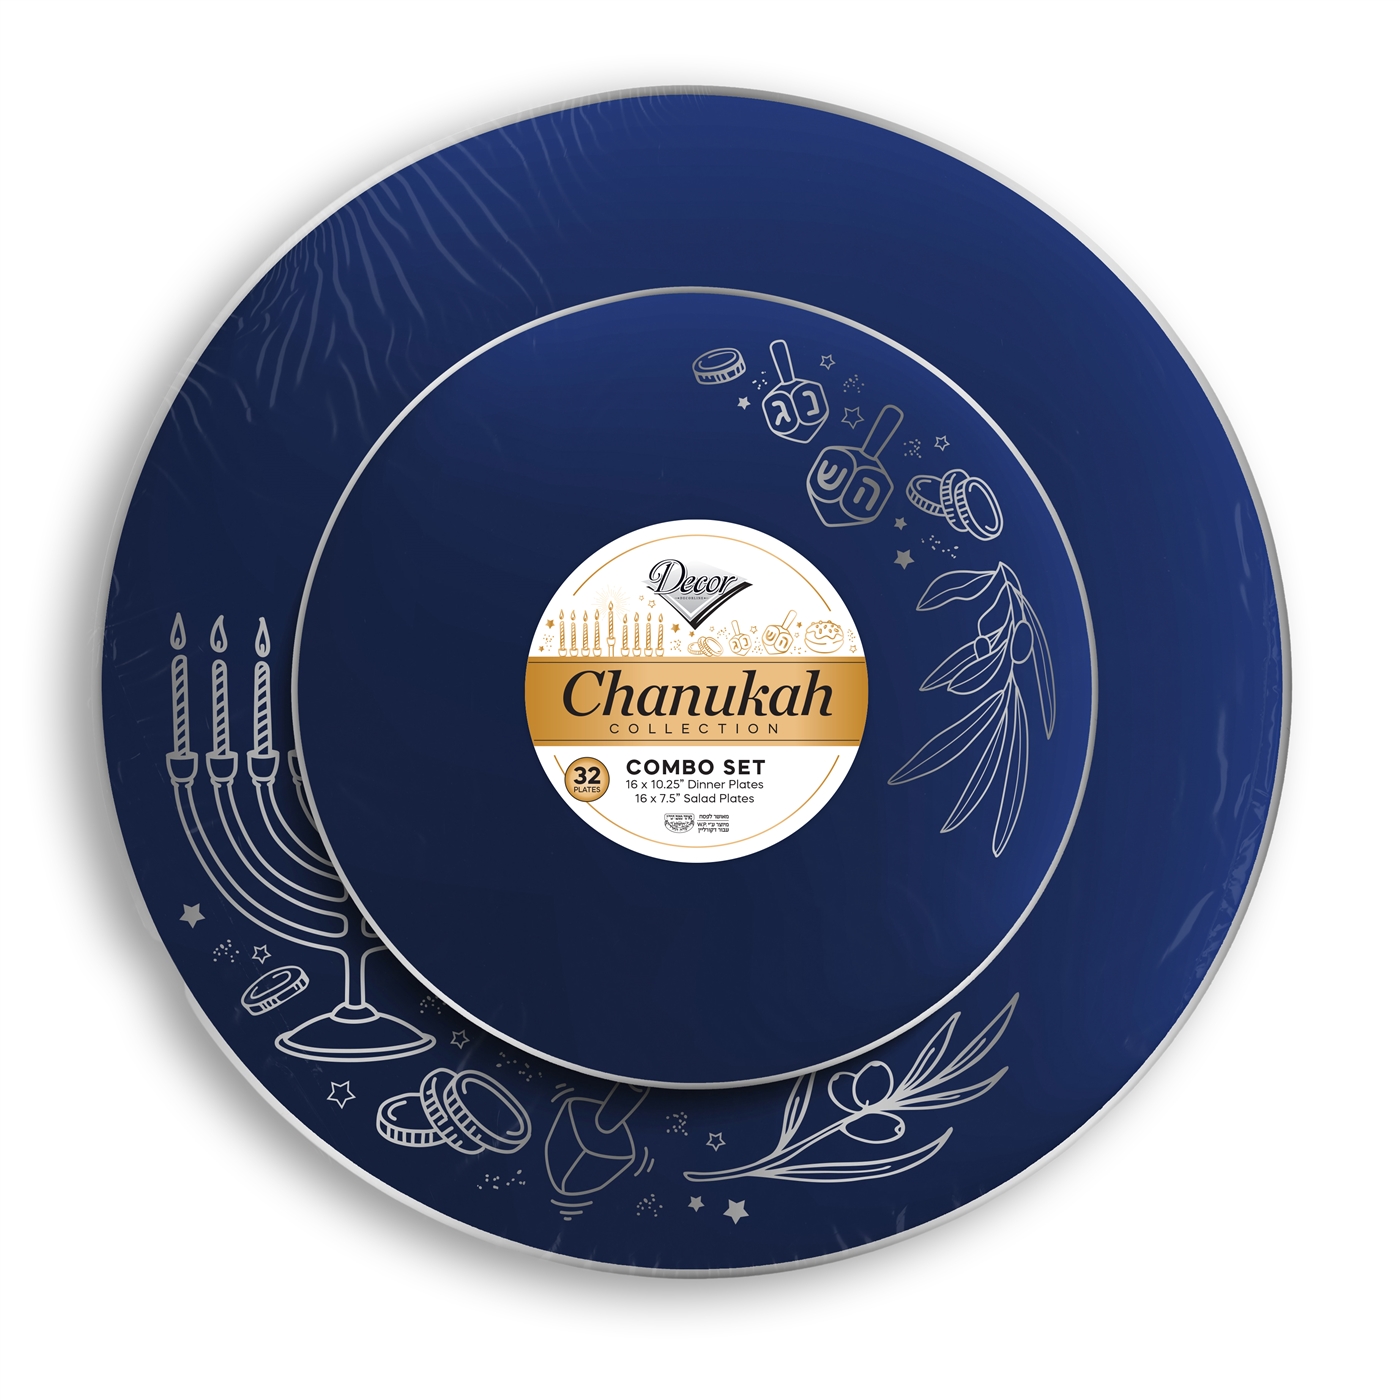 Decor Round Chanukah Collection Navy Blue with Silver